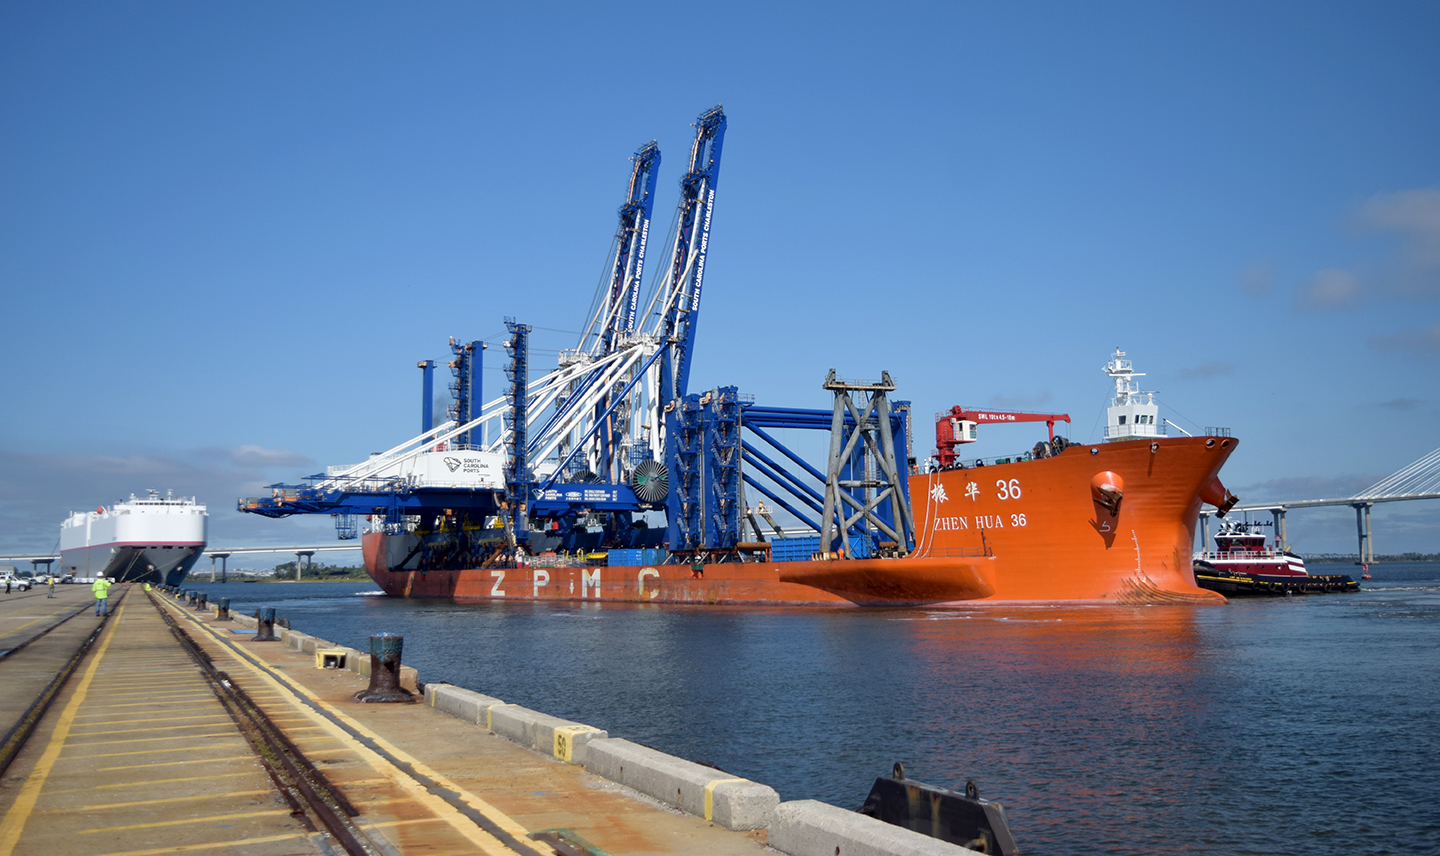 Five new cranes arrived in Charleston on Monday to be reconfigured, outfitted and reconnect to servce the Hugh K. Leatherman Sr. Terminal, which is expected to open in March. (Photo/Teri Errico Griffis)